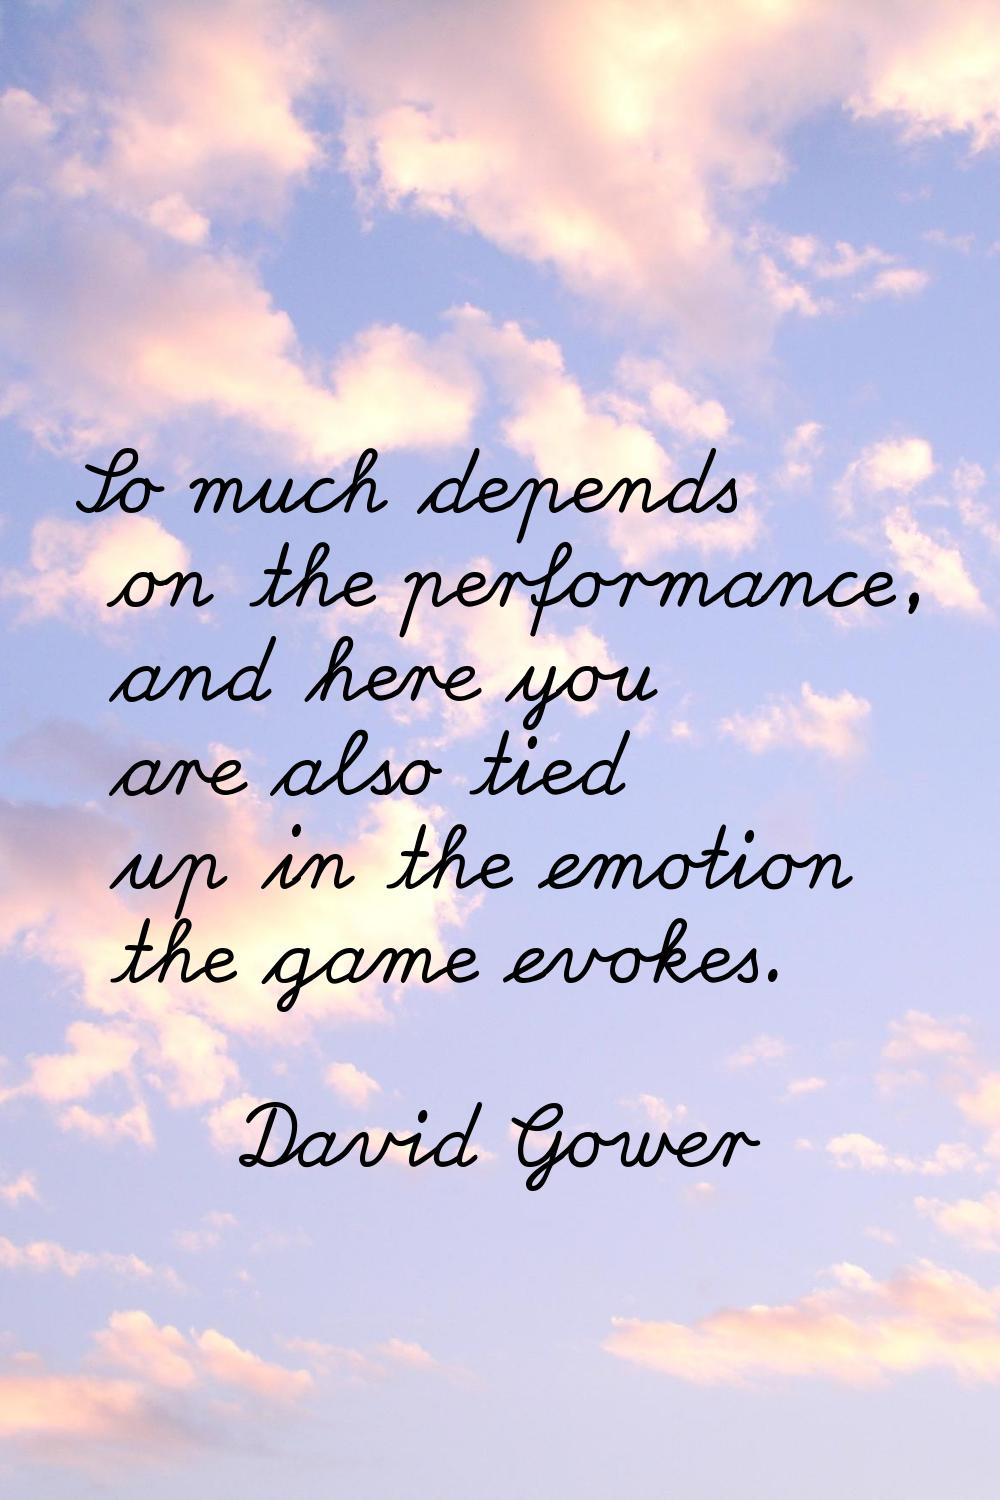 So much depends on the performance, and here you are also tied up in the emotion the game evokes.